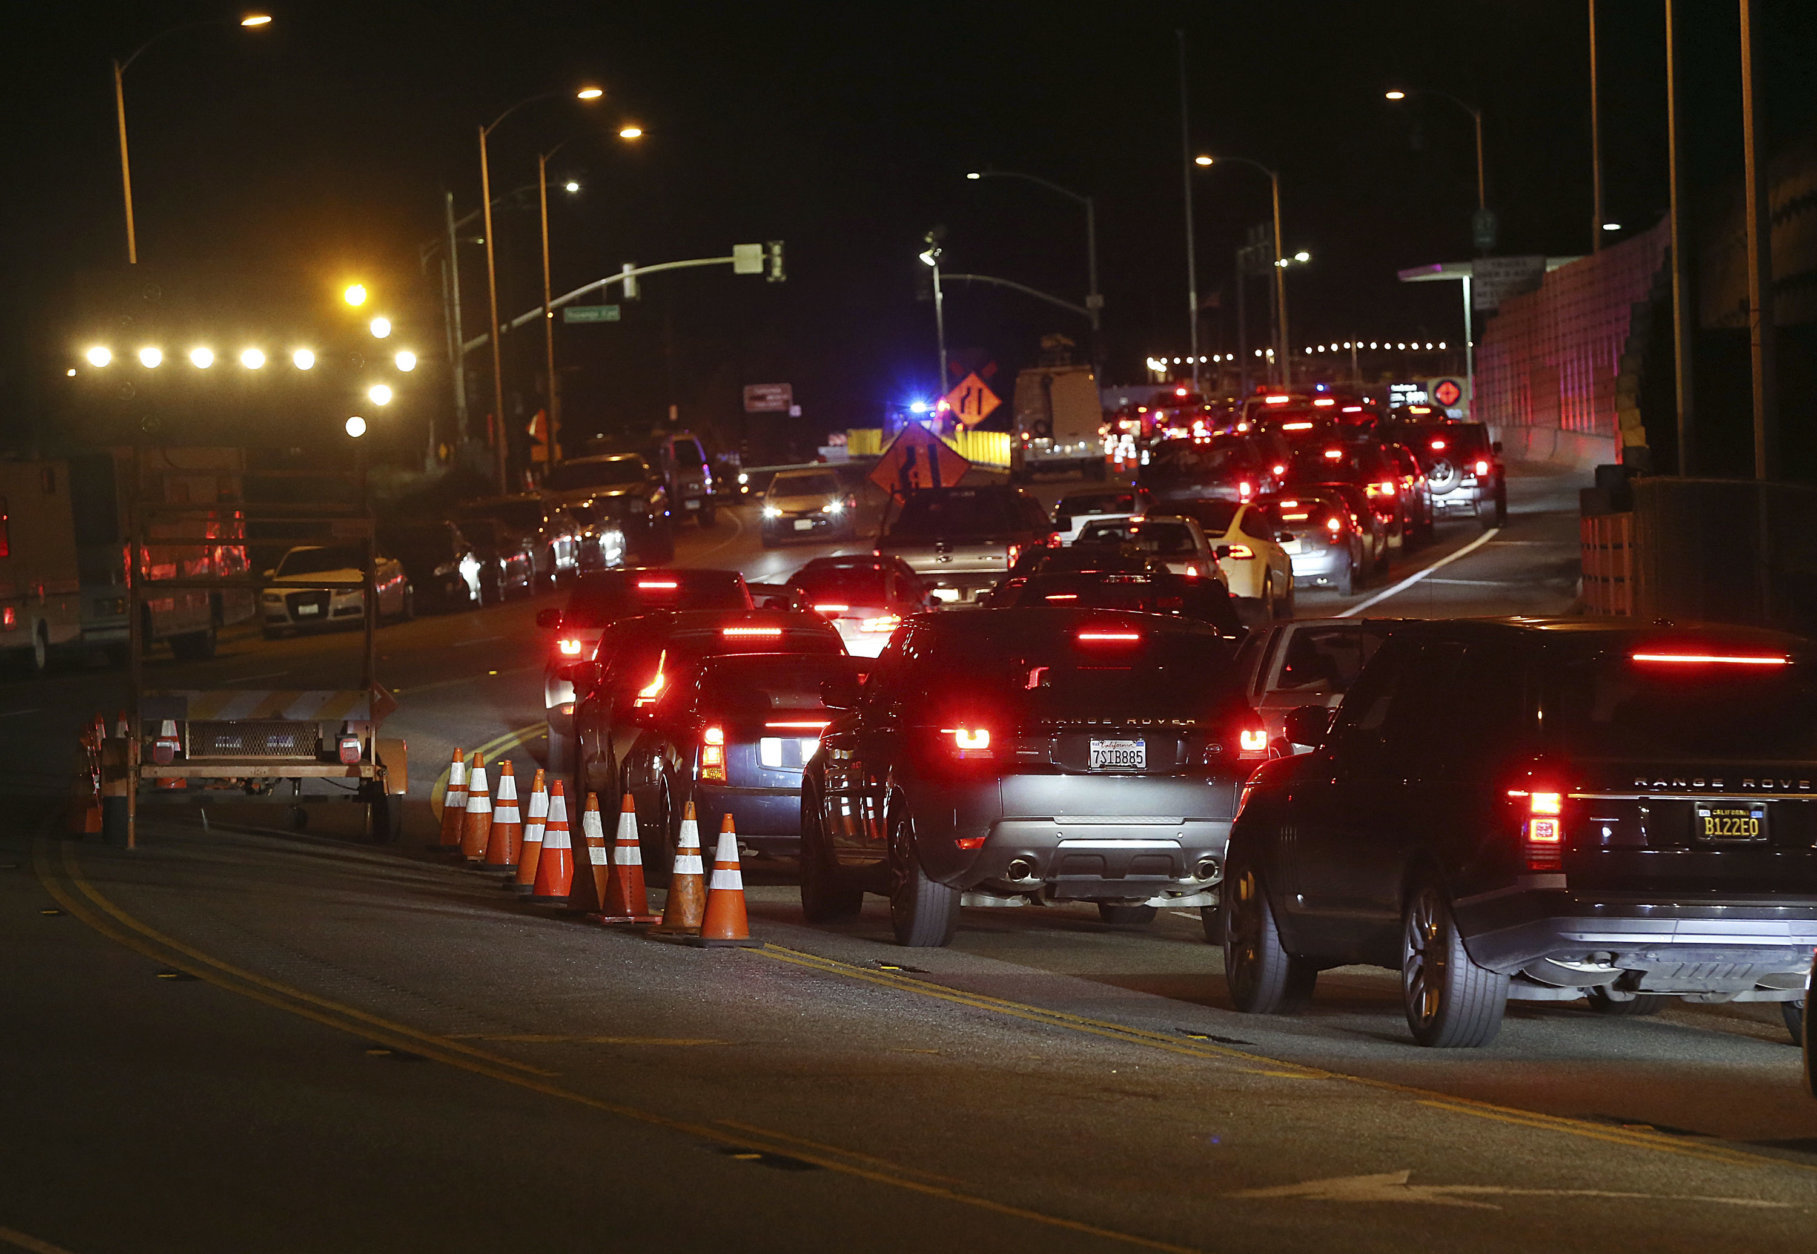 A long line of residents seeking to return to Malibu, Calif., in Southern California wait at a checkpoint on Pacific Coast Highway after Woolsey Fire evacuation orders were lifted for the eastern portion of the city Tuesday evening, Nov. 13, 2018. (AP Photo/Reed Saxon)